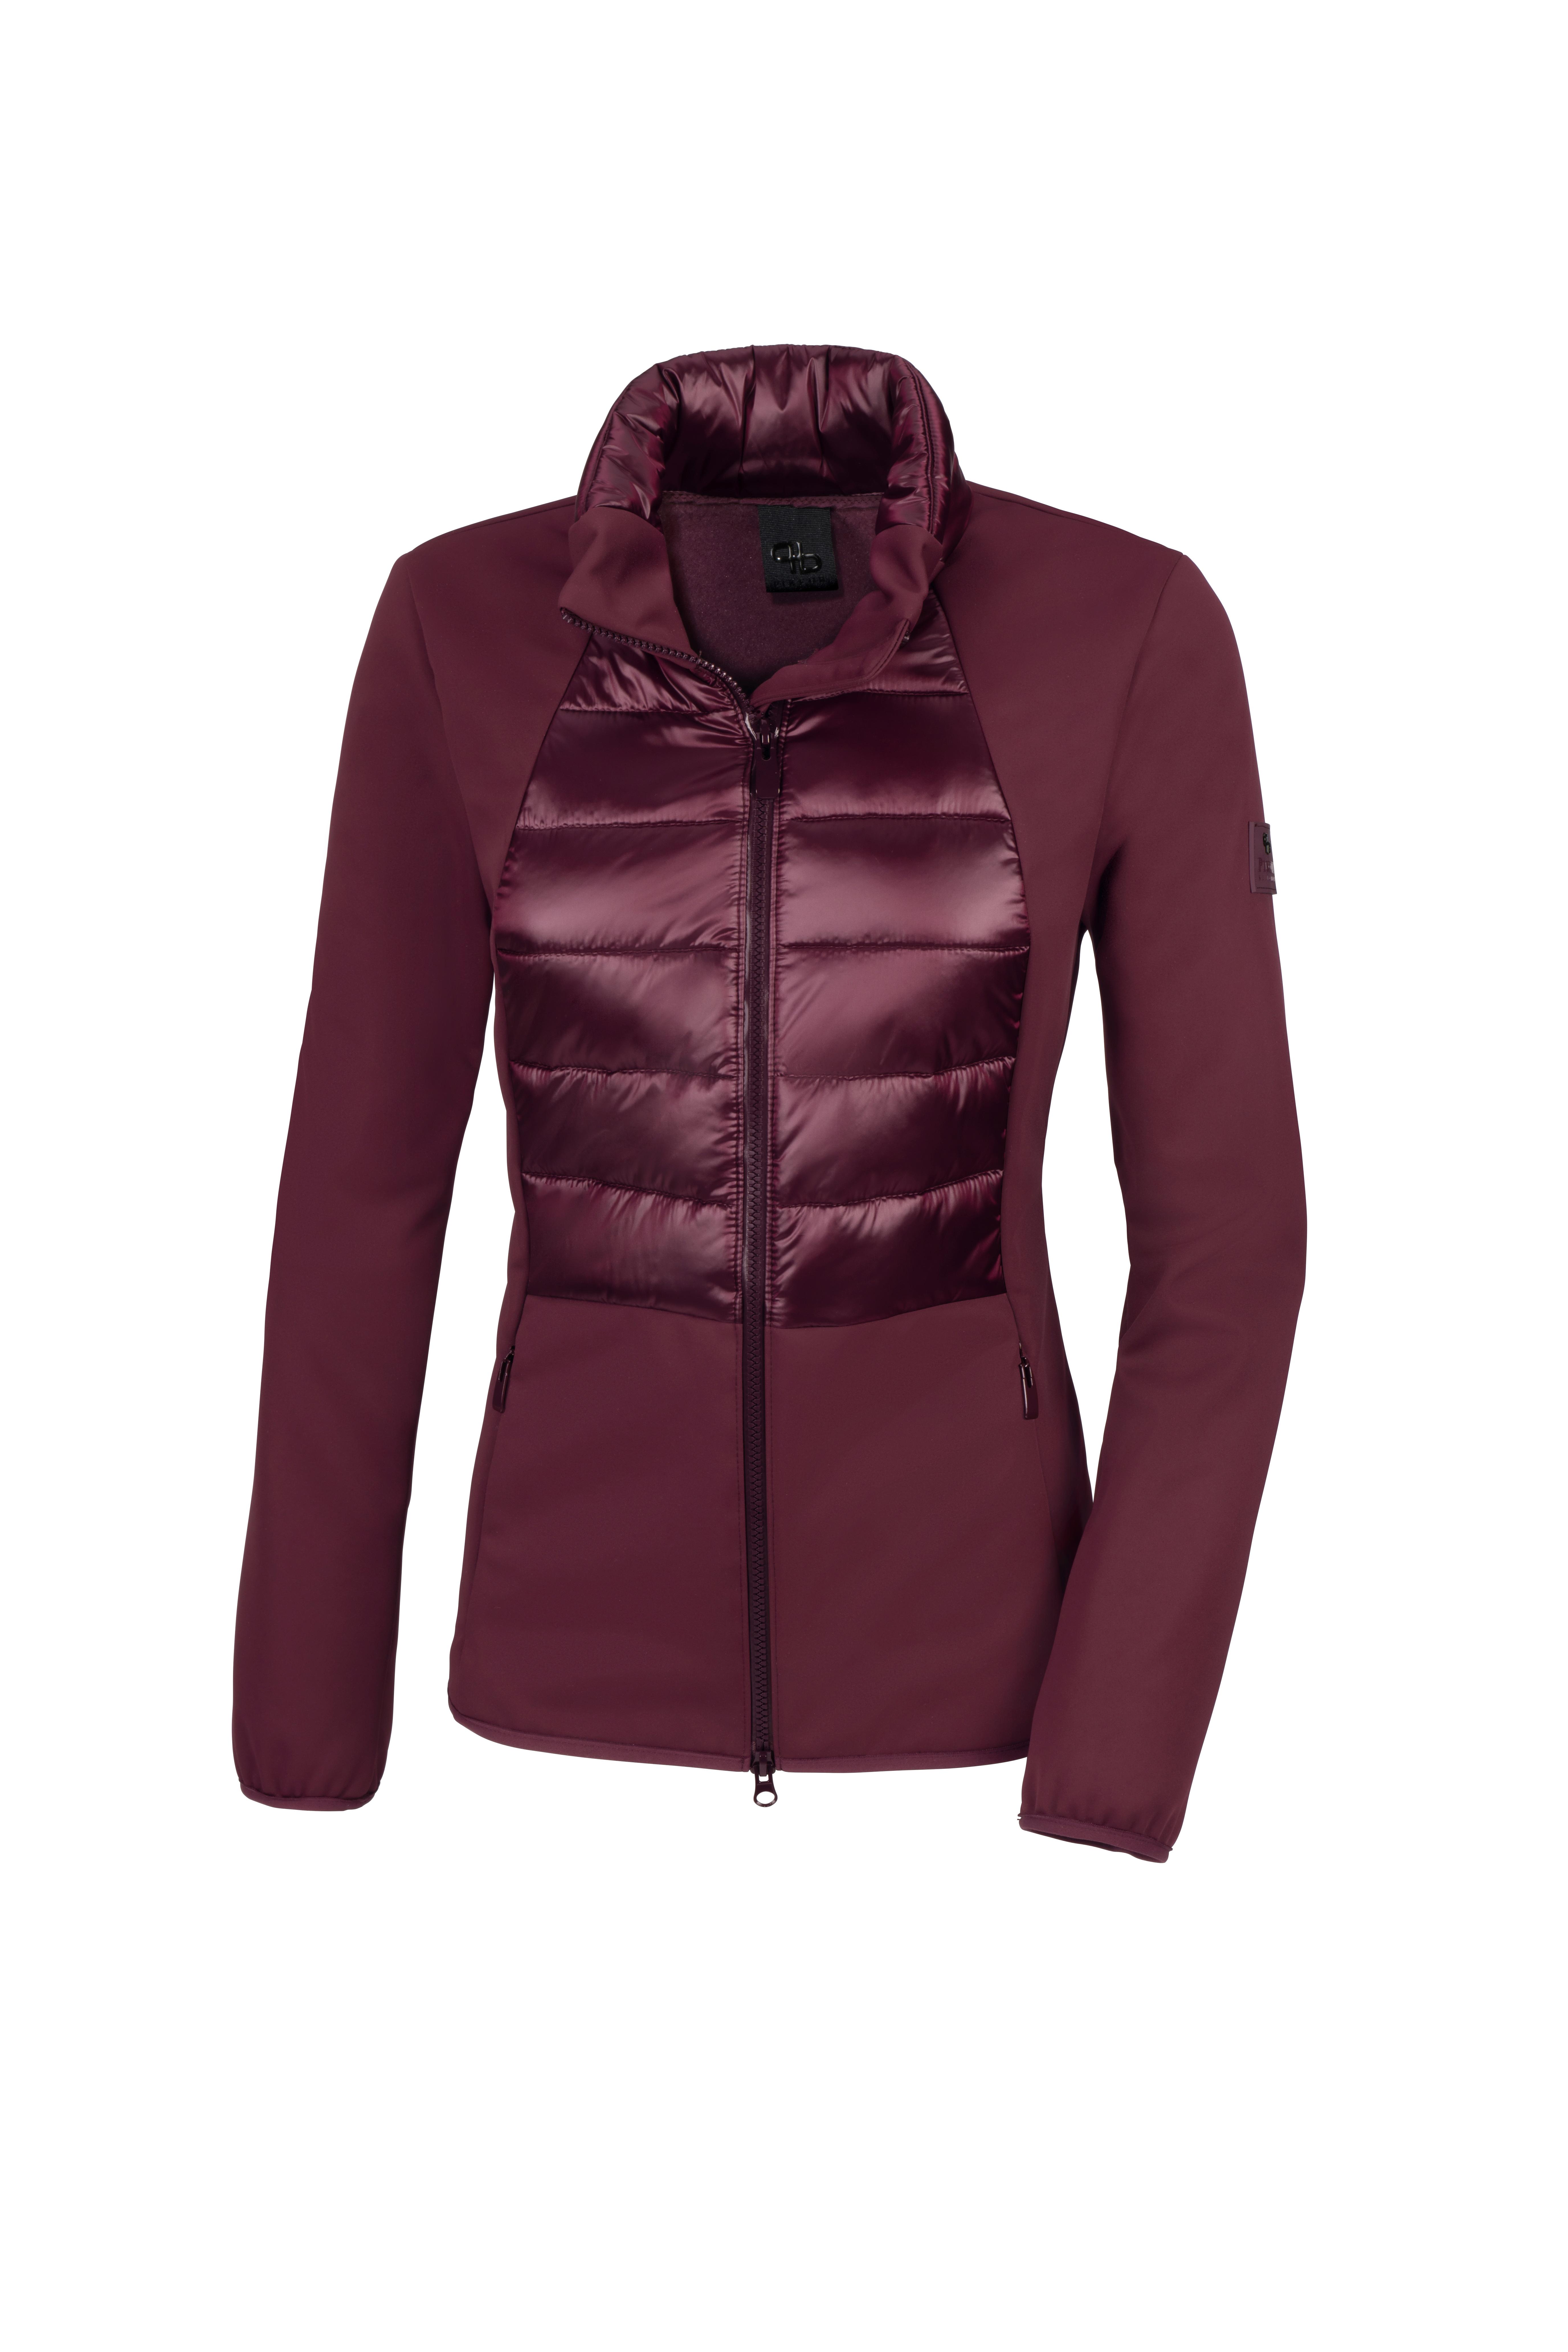 PIKEUR HYBRID Jacket 4047 SELECTION, Mulberry